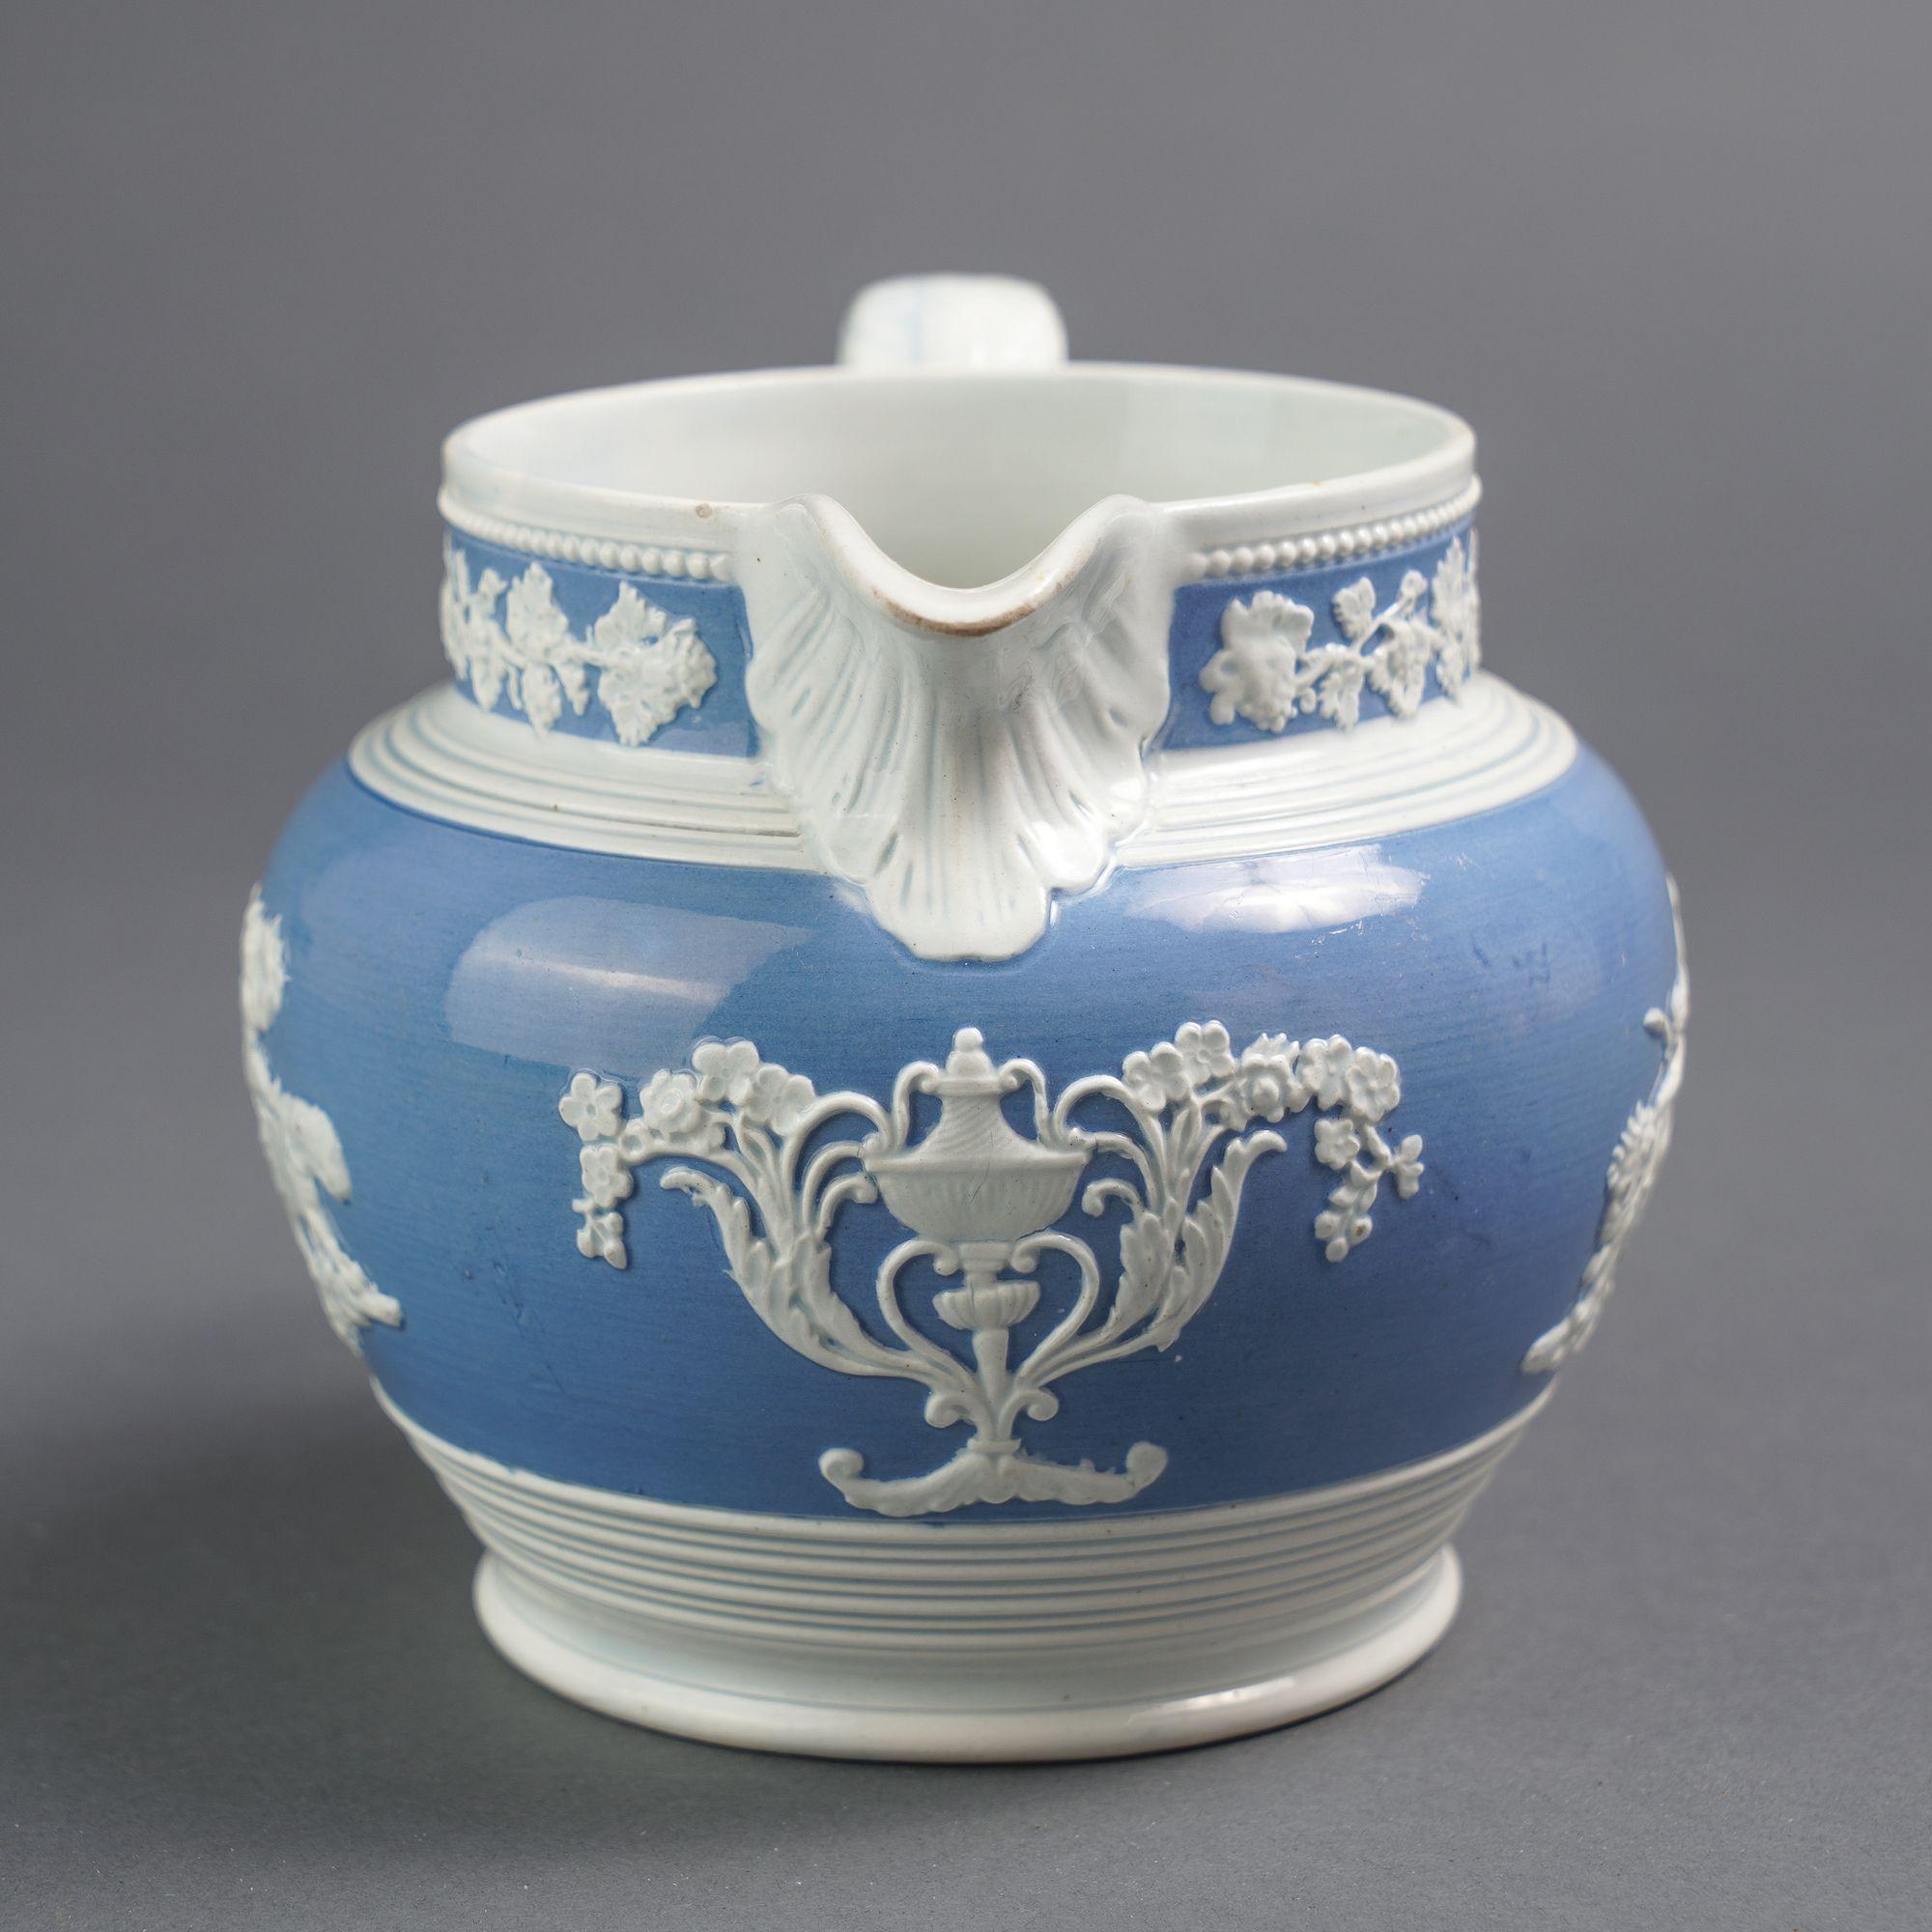 English Staffordshire pearlware pitcher by Chetham & Woolley, 1820-30 For Sale 1